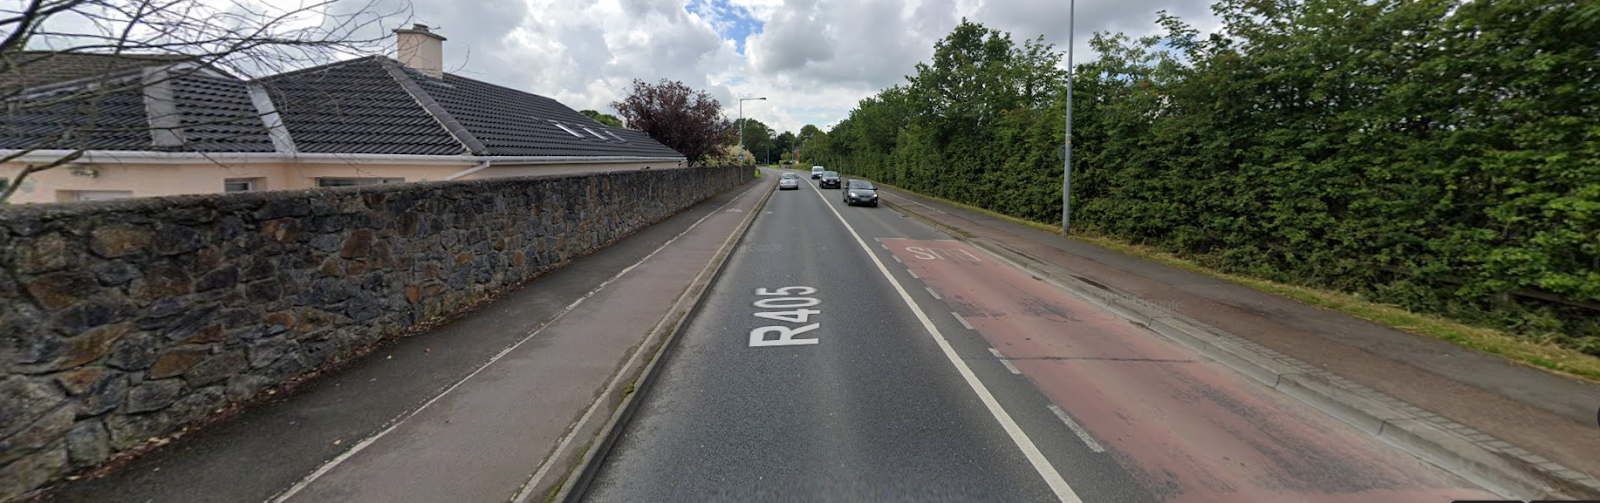 Cycling and Walking Infrastructure on the Maynooth Road